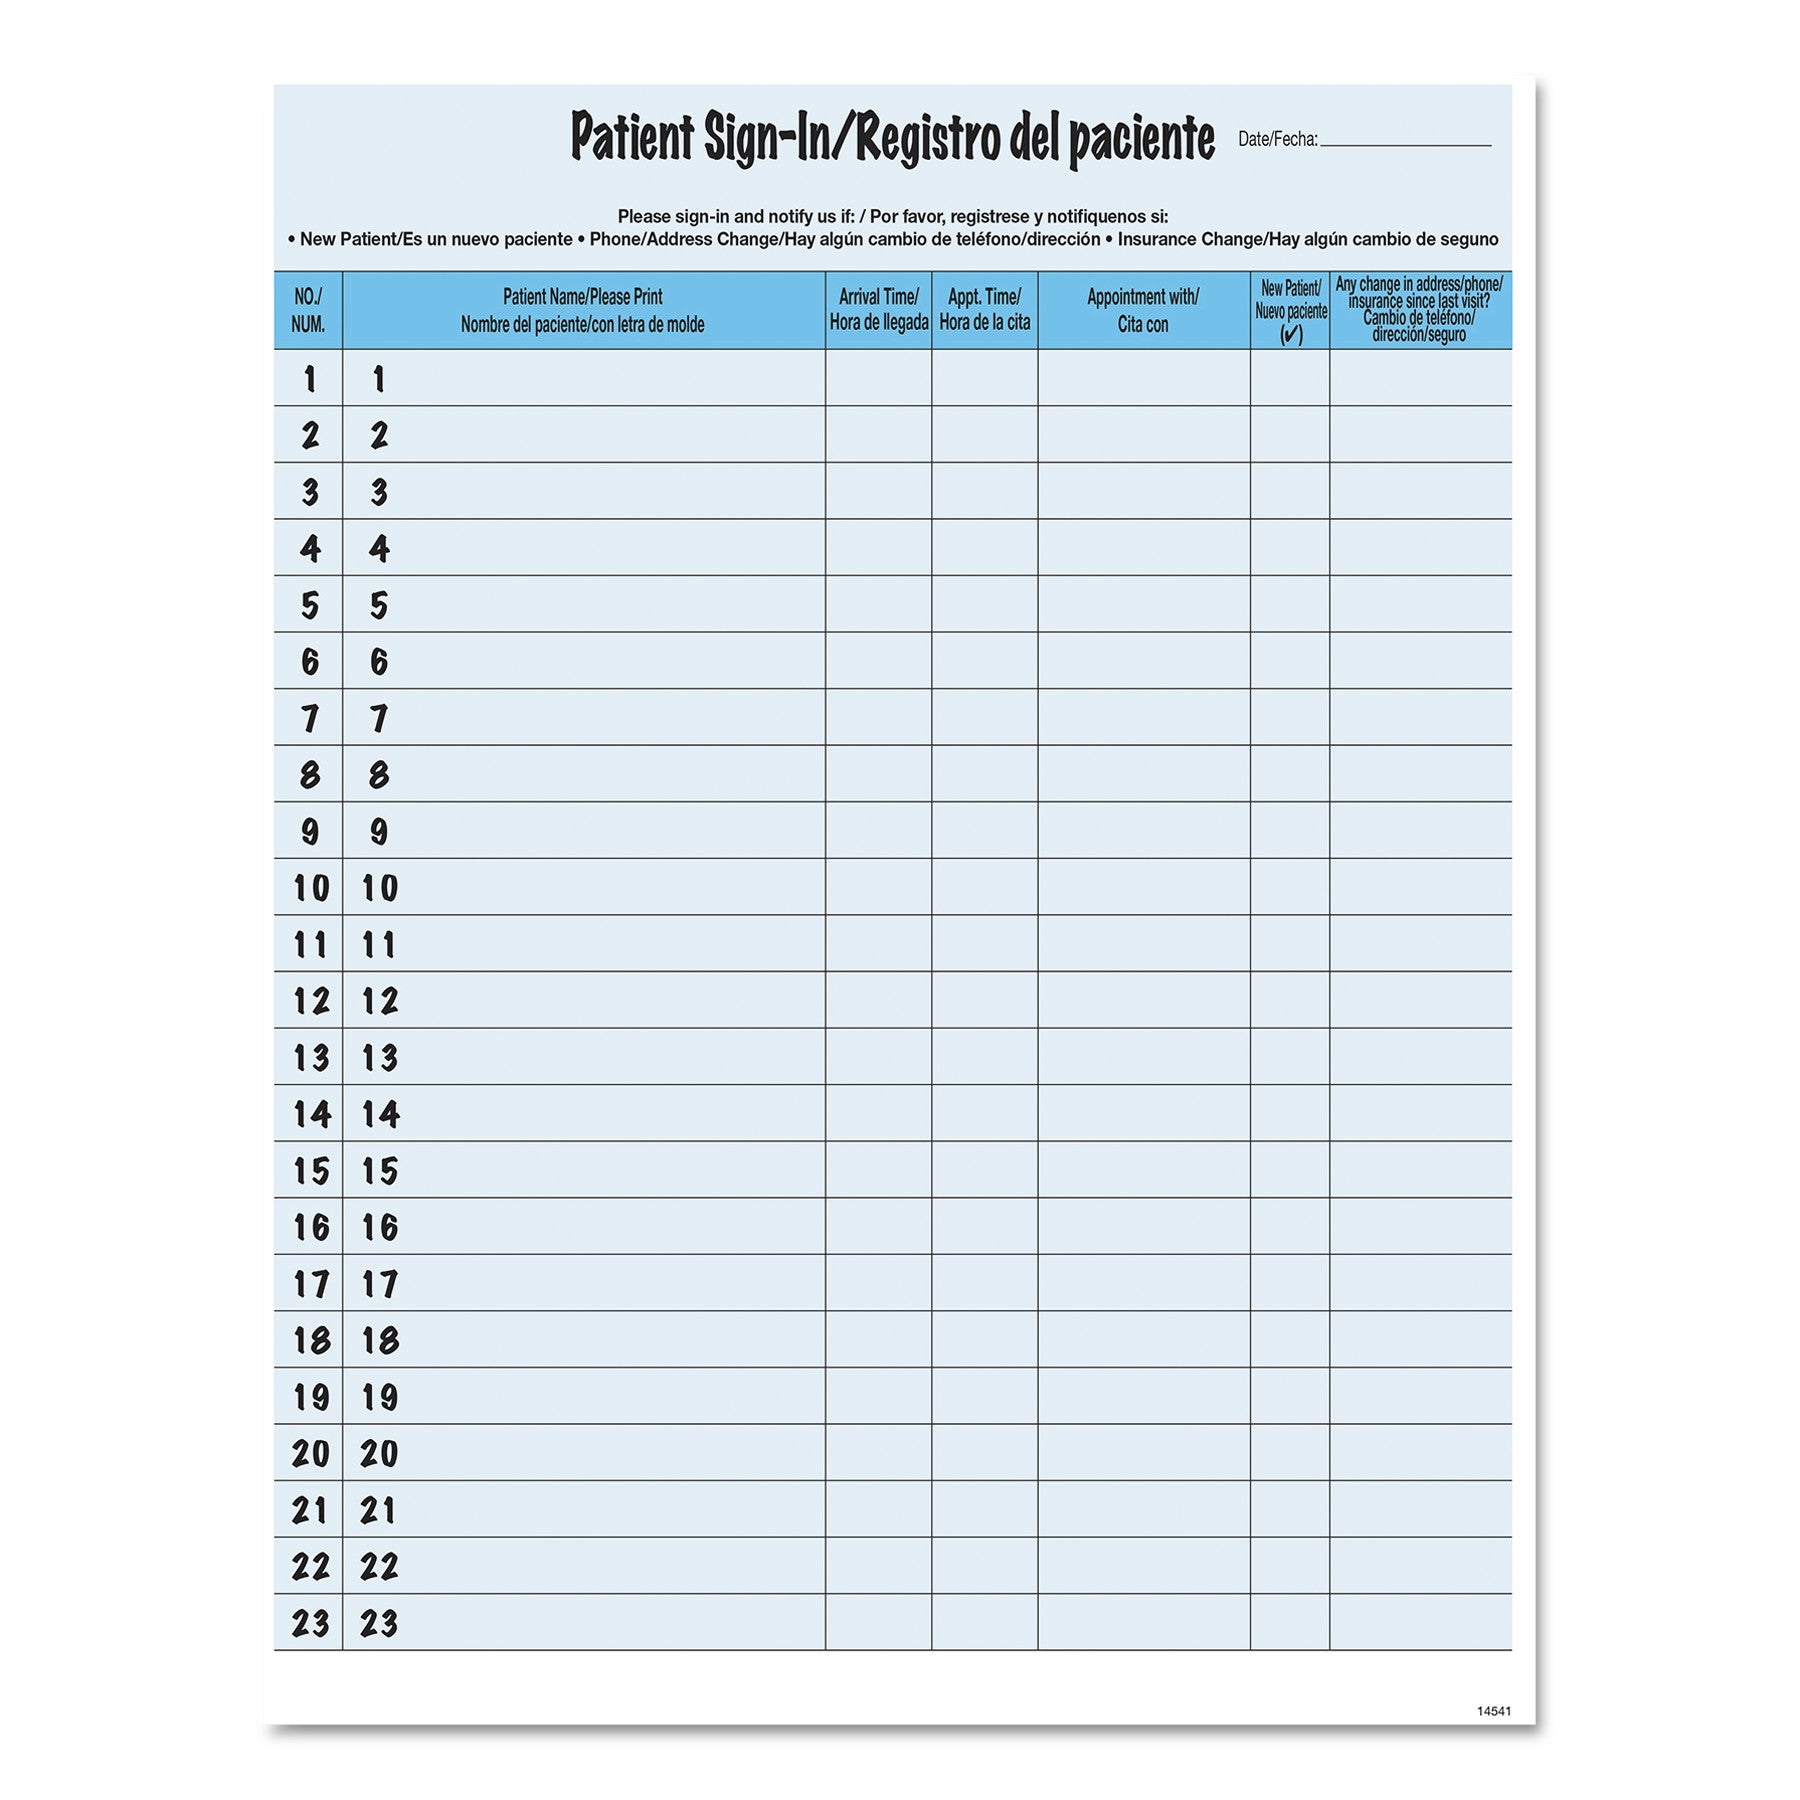 hipaa-labels-patient-sign-in-85-x-11-blue-23-sheet-125-sheets-pack_tab14541 - 1